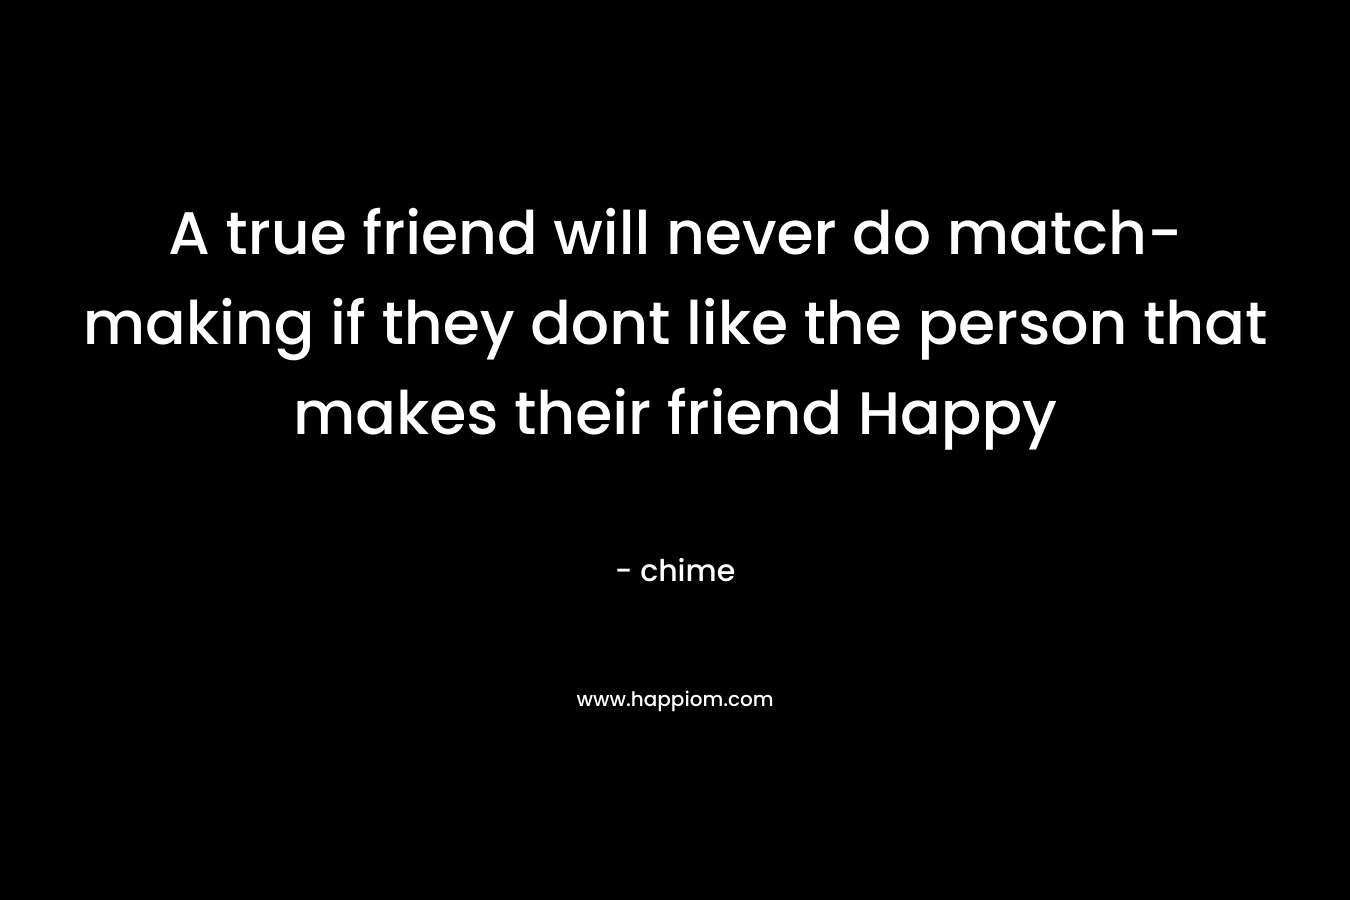 A true friend will never do match-making if they dont like the person that makes their friend Happy – chime